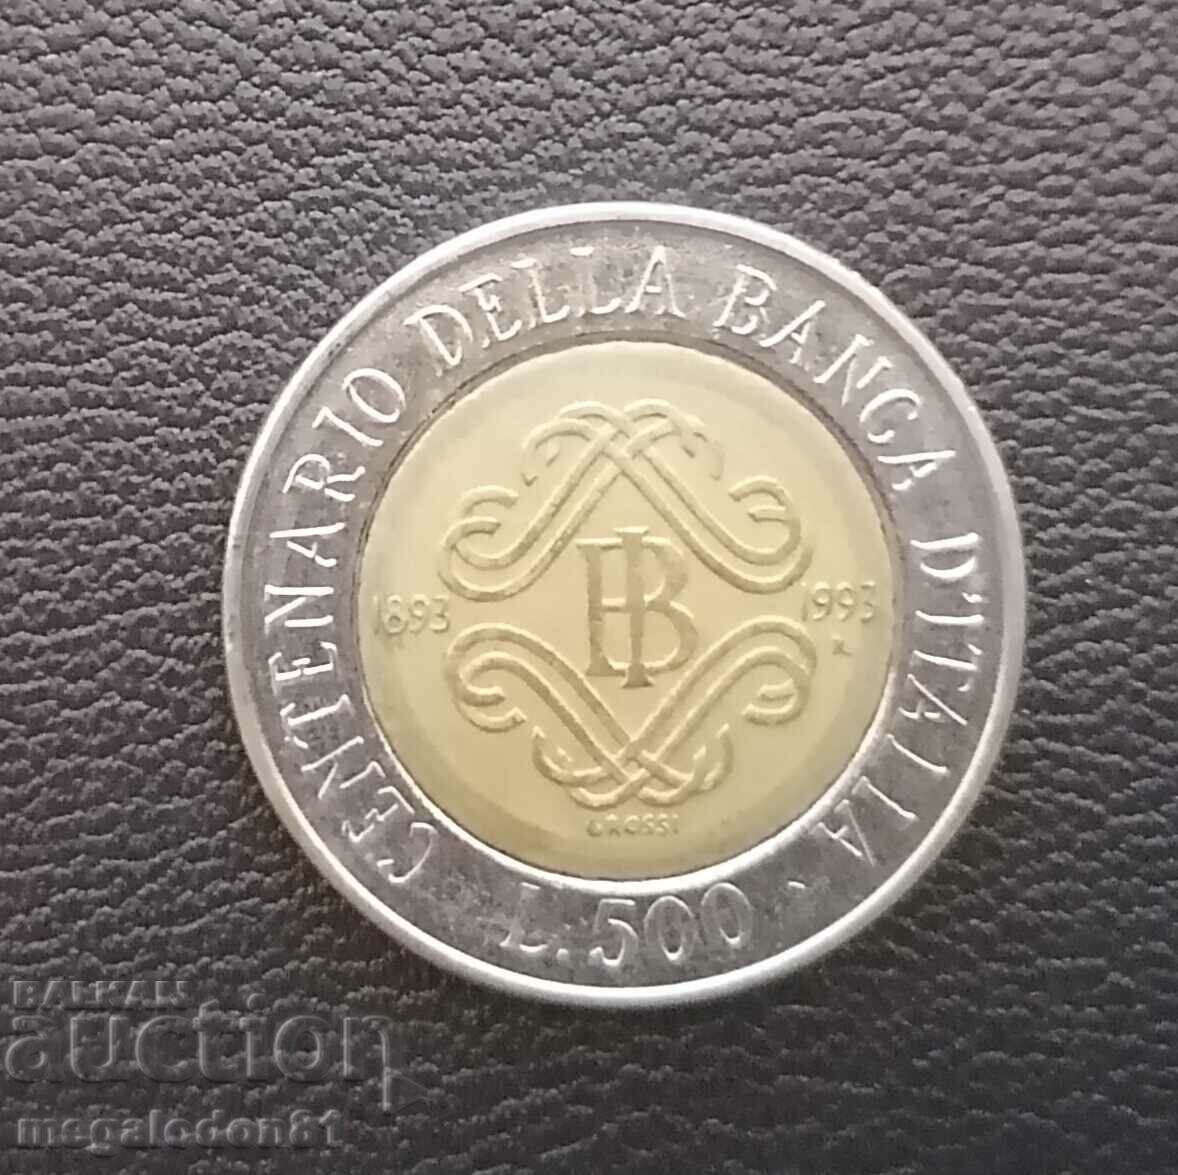 Italy - 500 pounds, 1993